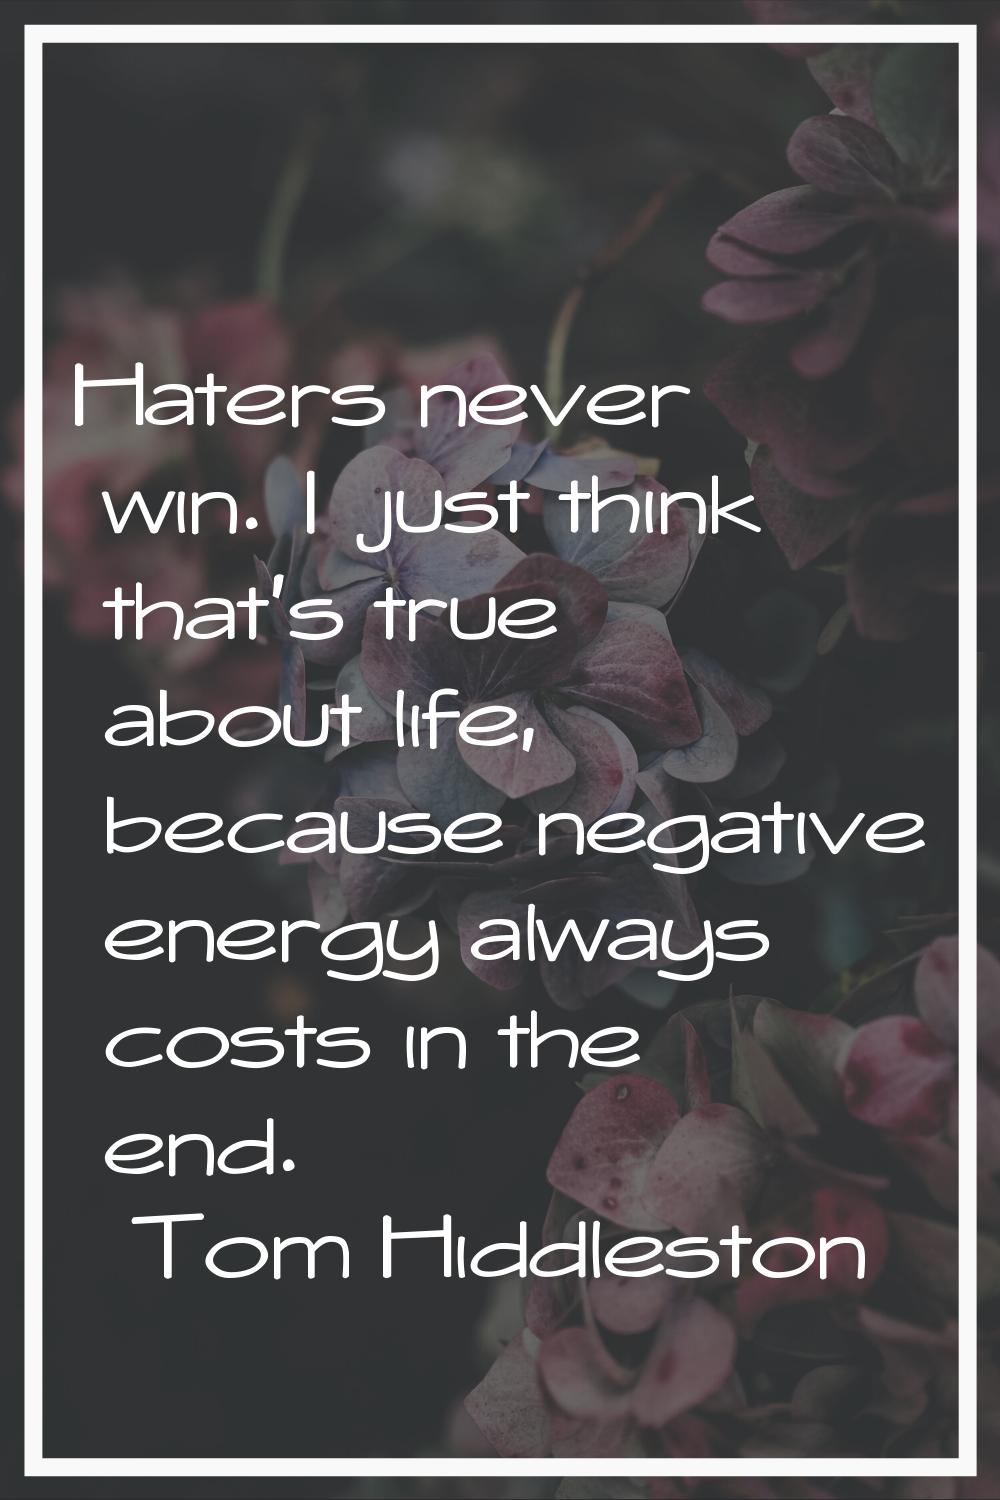 Haters never win. I just think that's true about life, because negative energy always costs in the 